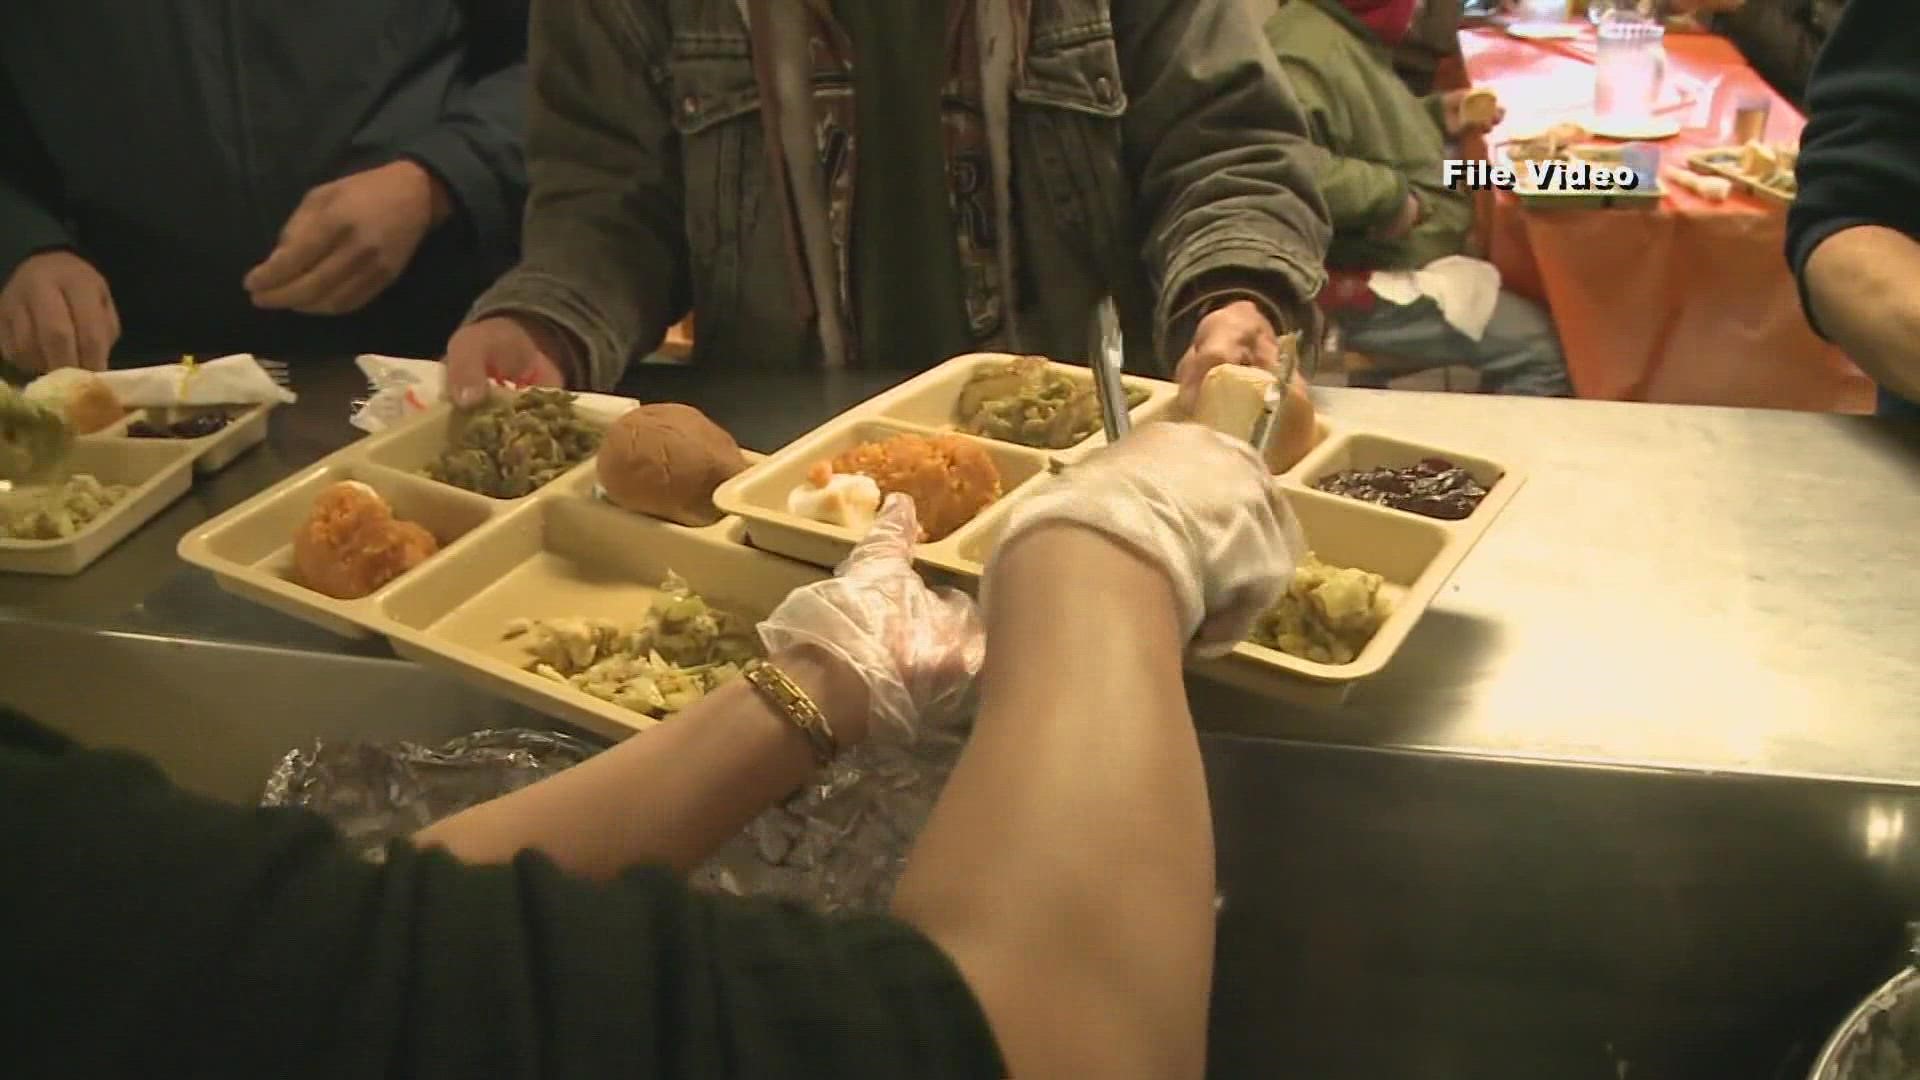 Free meals for all students is coming to an end at schools across the country.